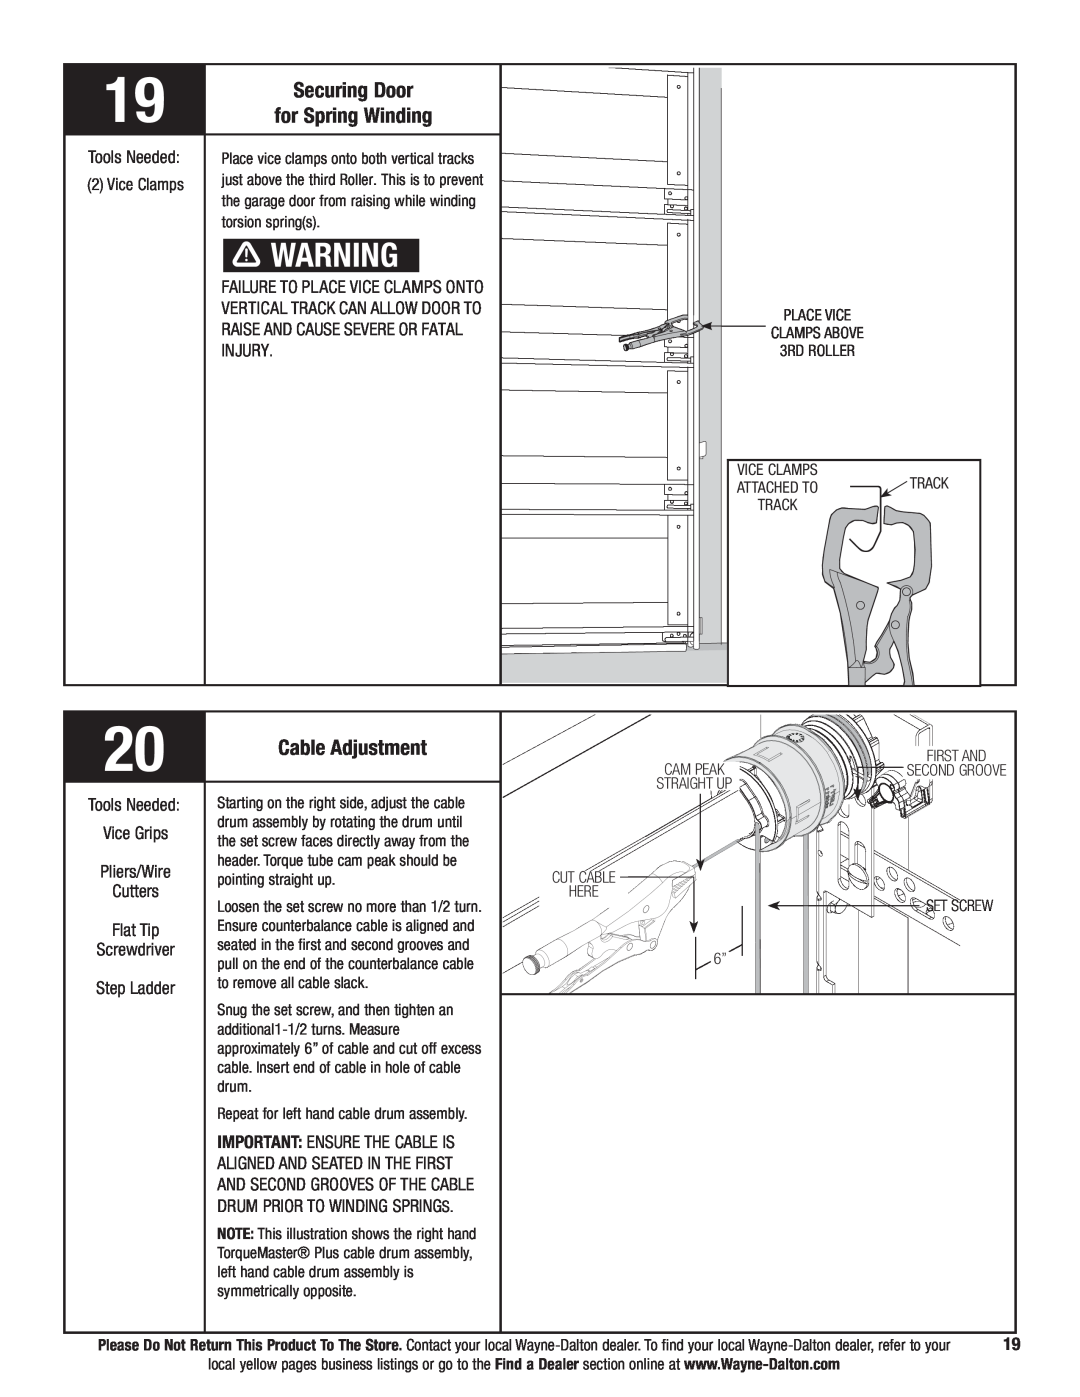 Wayne-Dalton 9700 installation instructions Securing Door for Spring Winding, Cable Adjustment, Tools Needed 2 Vice Clamps 